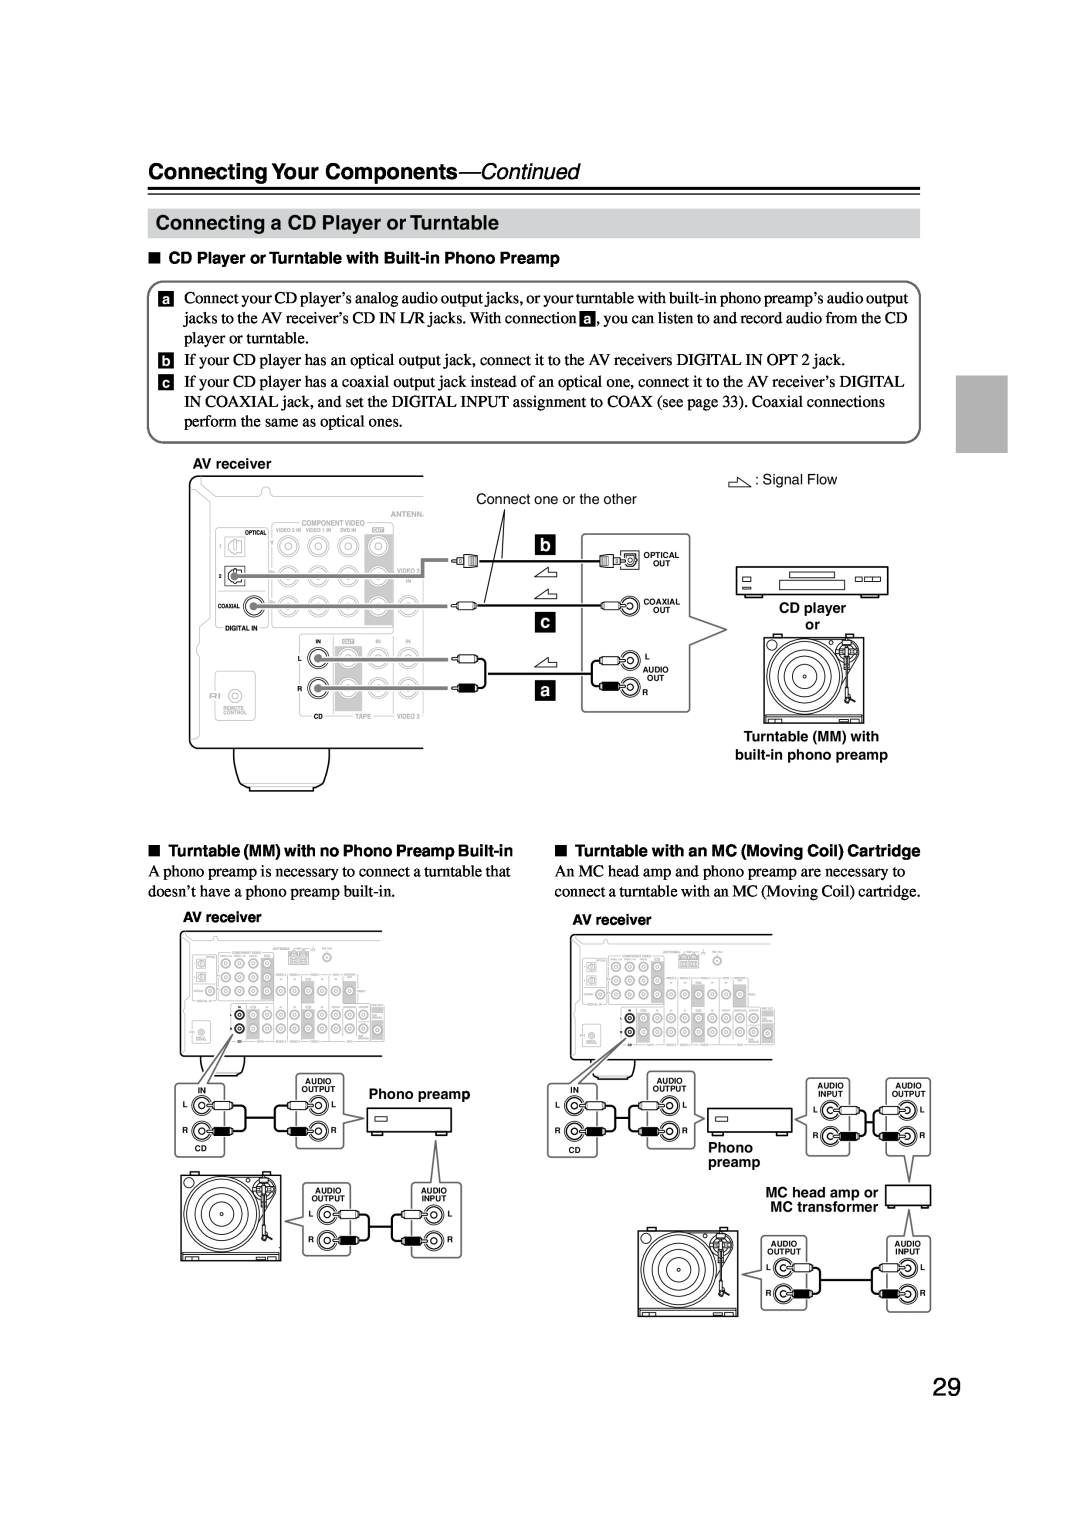 Onkyo TX-SR304 instruction manual Connecting a CD Player or Turntable, Connecting Your Components-Continued 